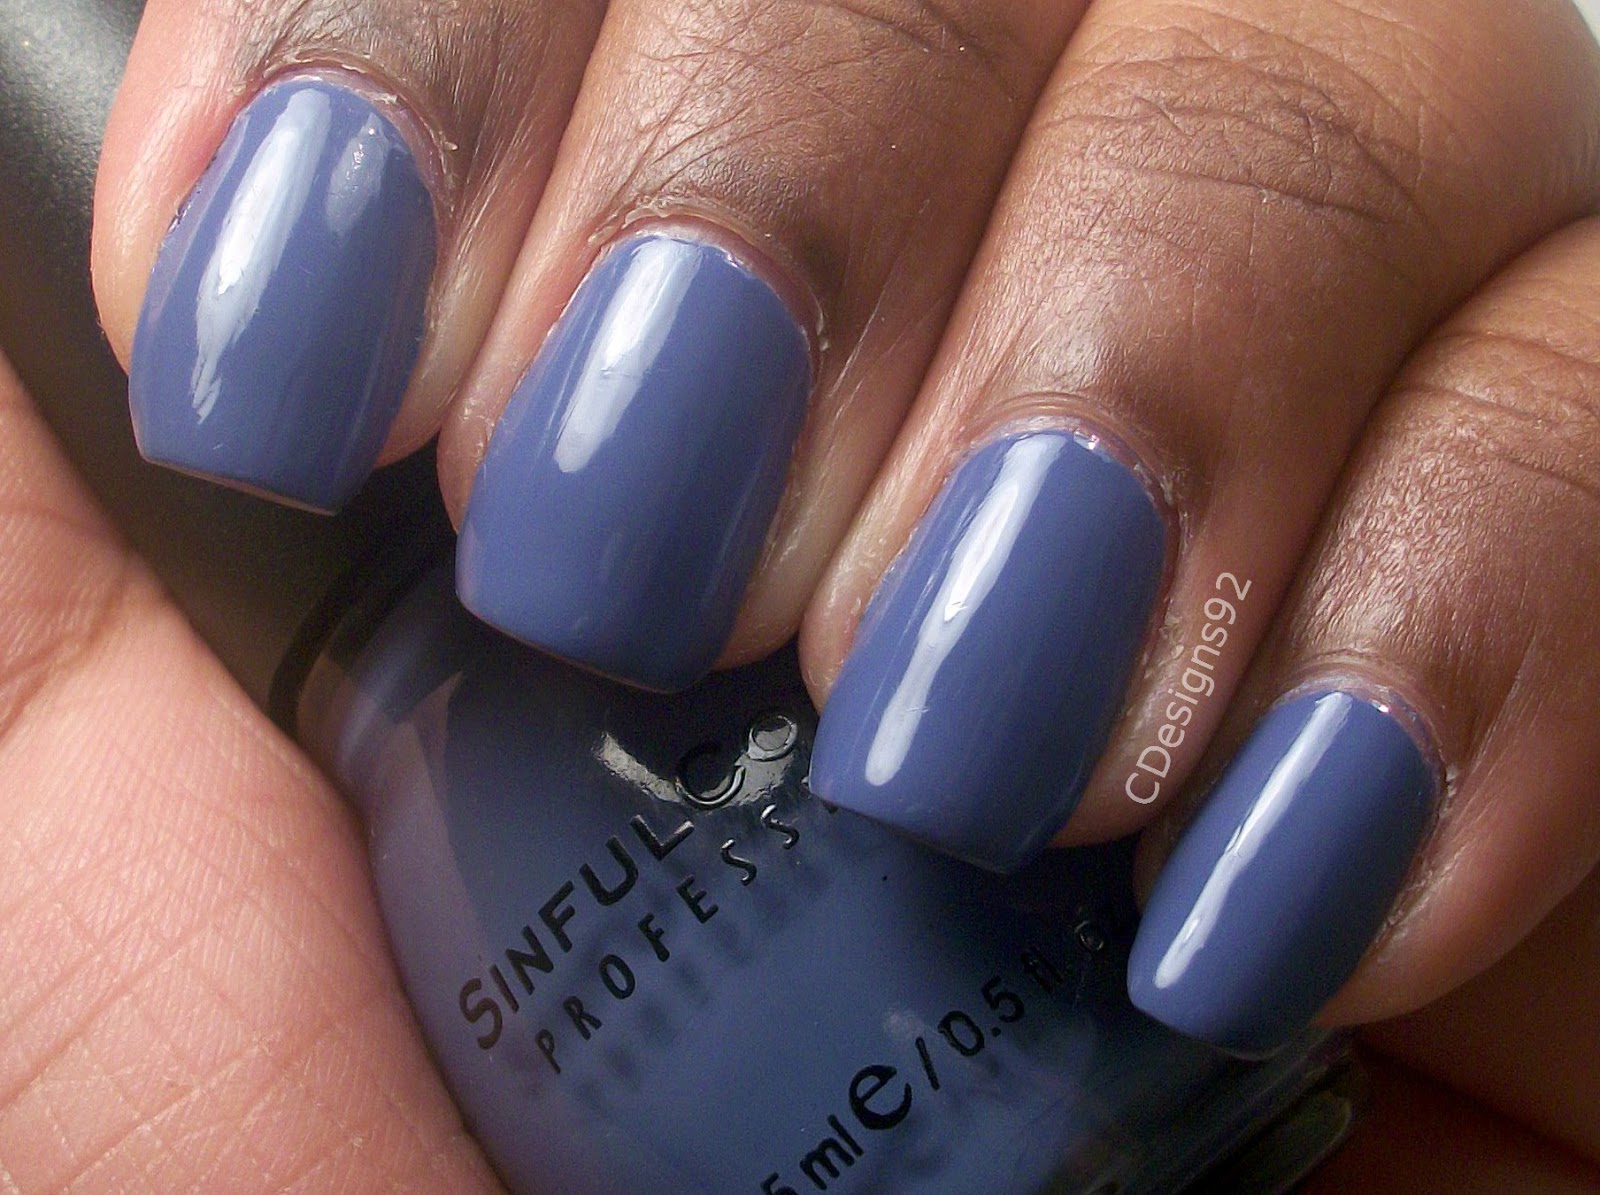 8. Sinful Colors Professional Nail Polish in "Lavender" - wide 1